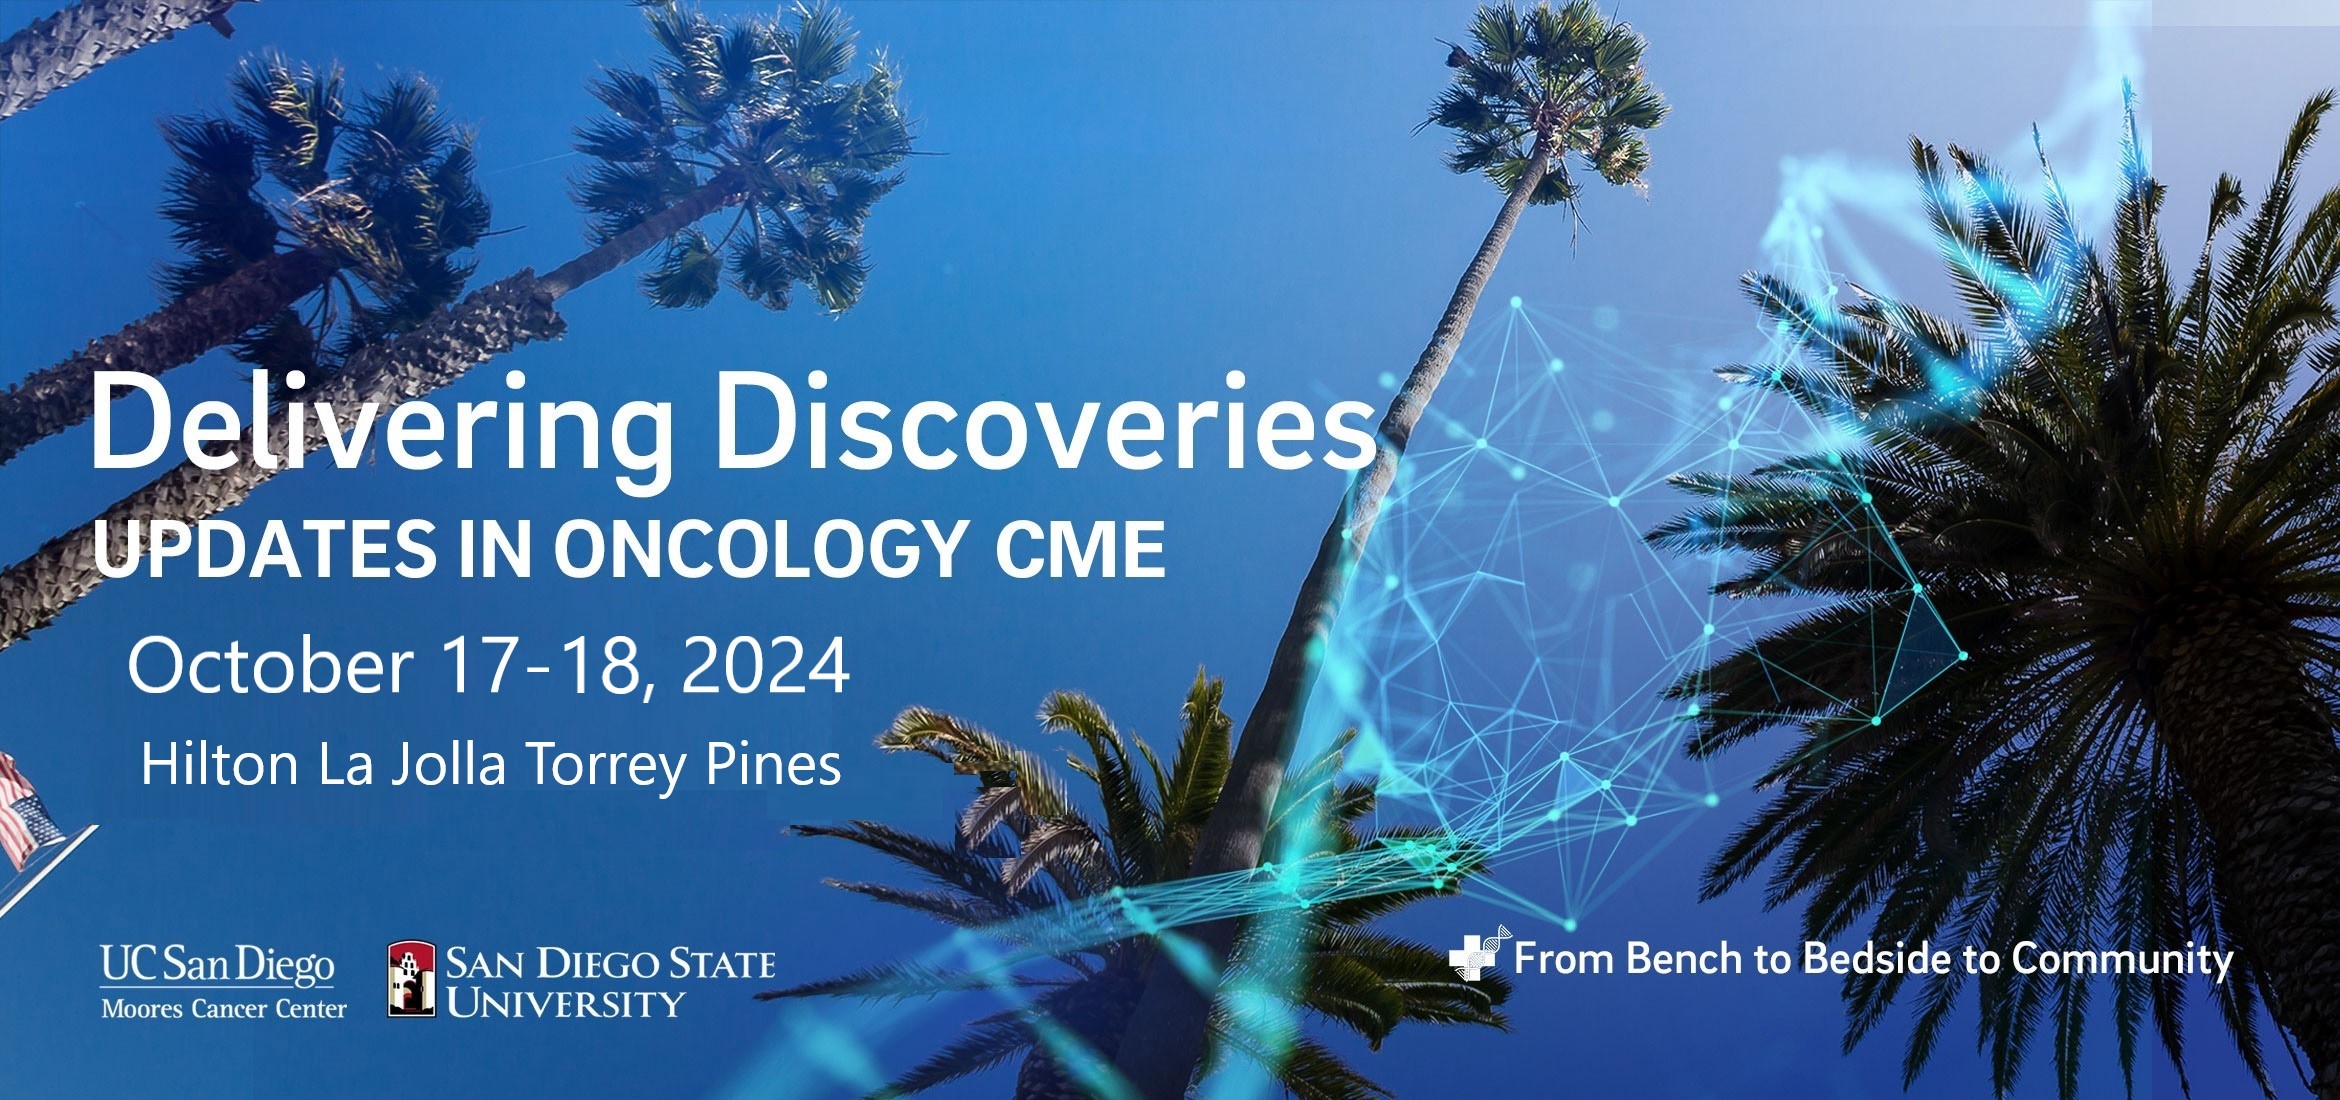 Delivering Discoveries Updates in Oncology 2024 SAVE THE DATE UC